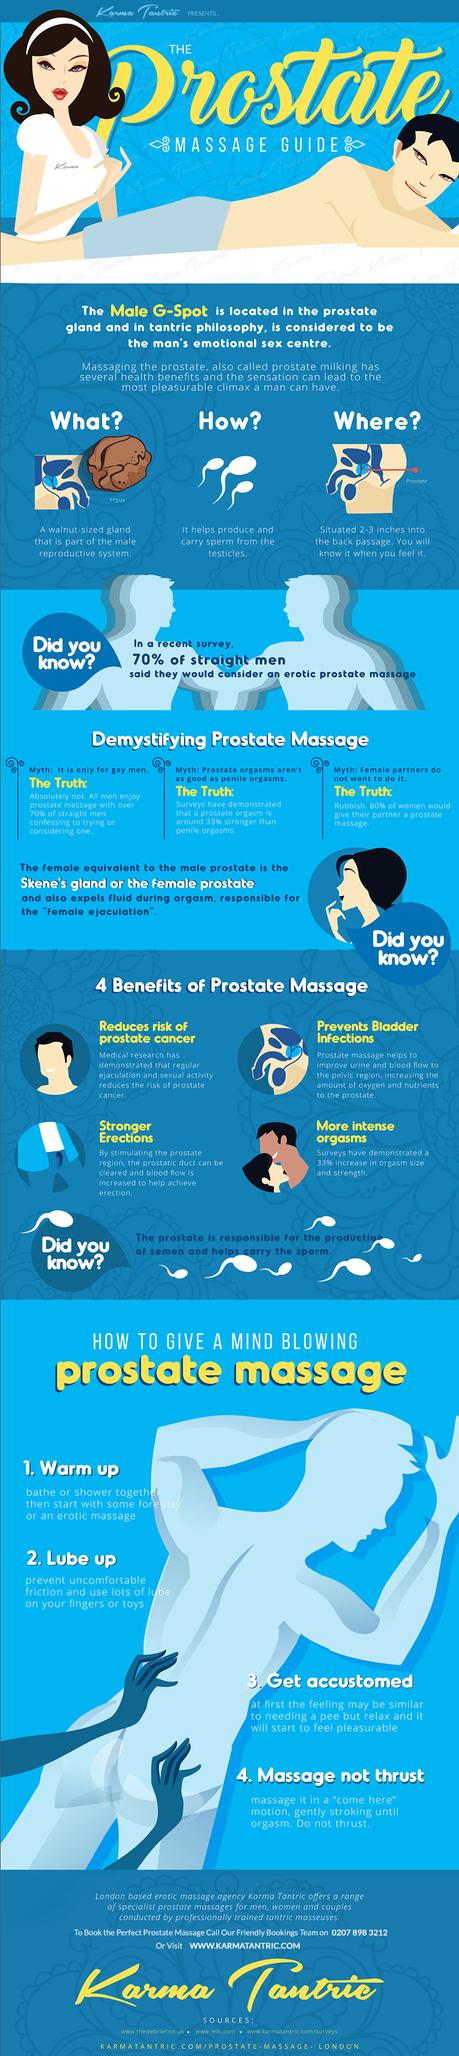 The Ultimate Prostate Massage Guide Infographic Paperblog